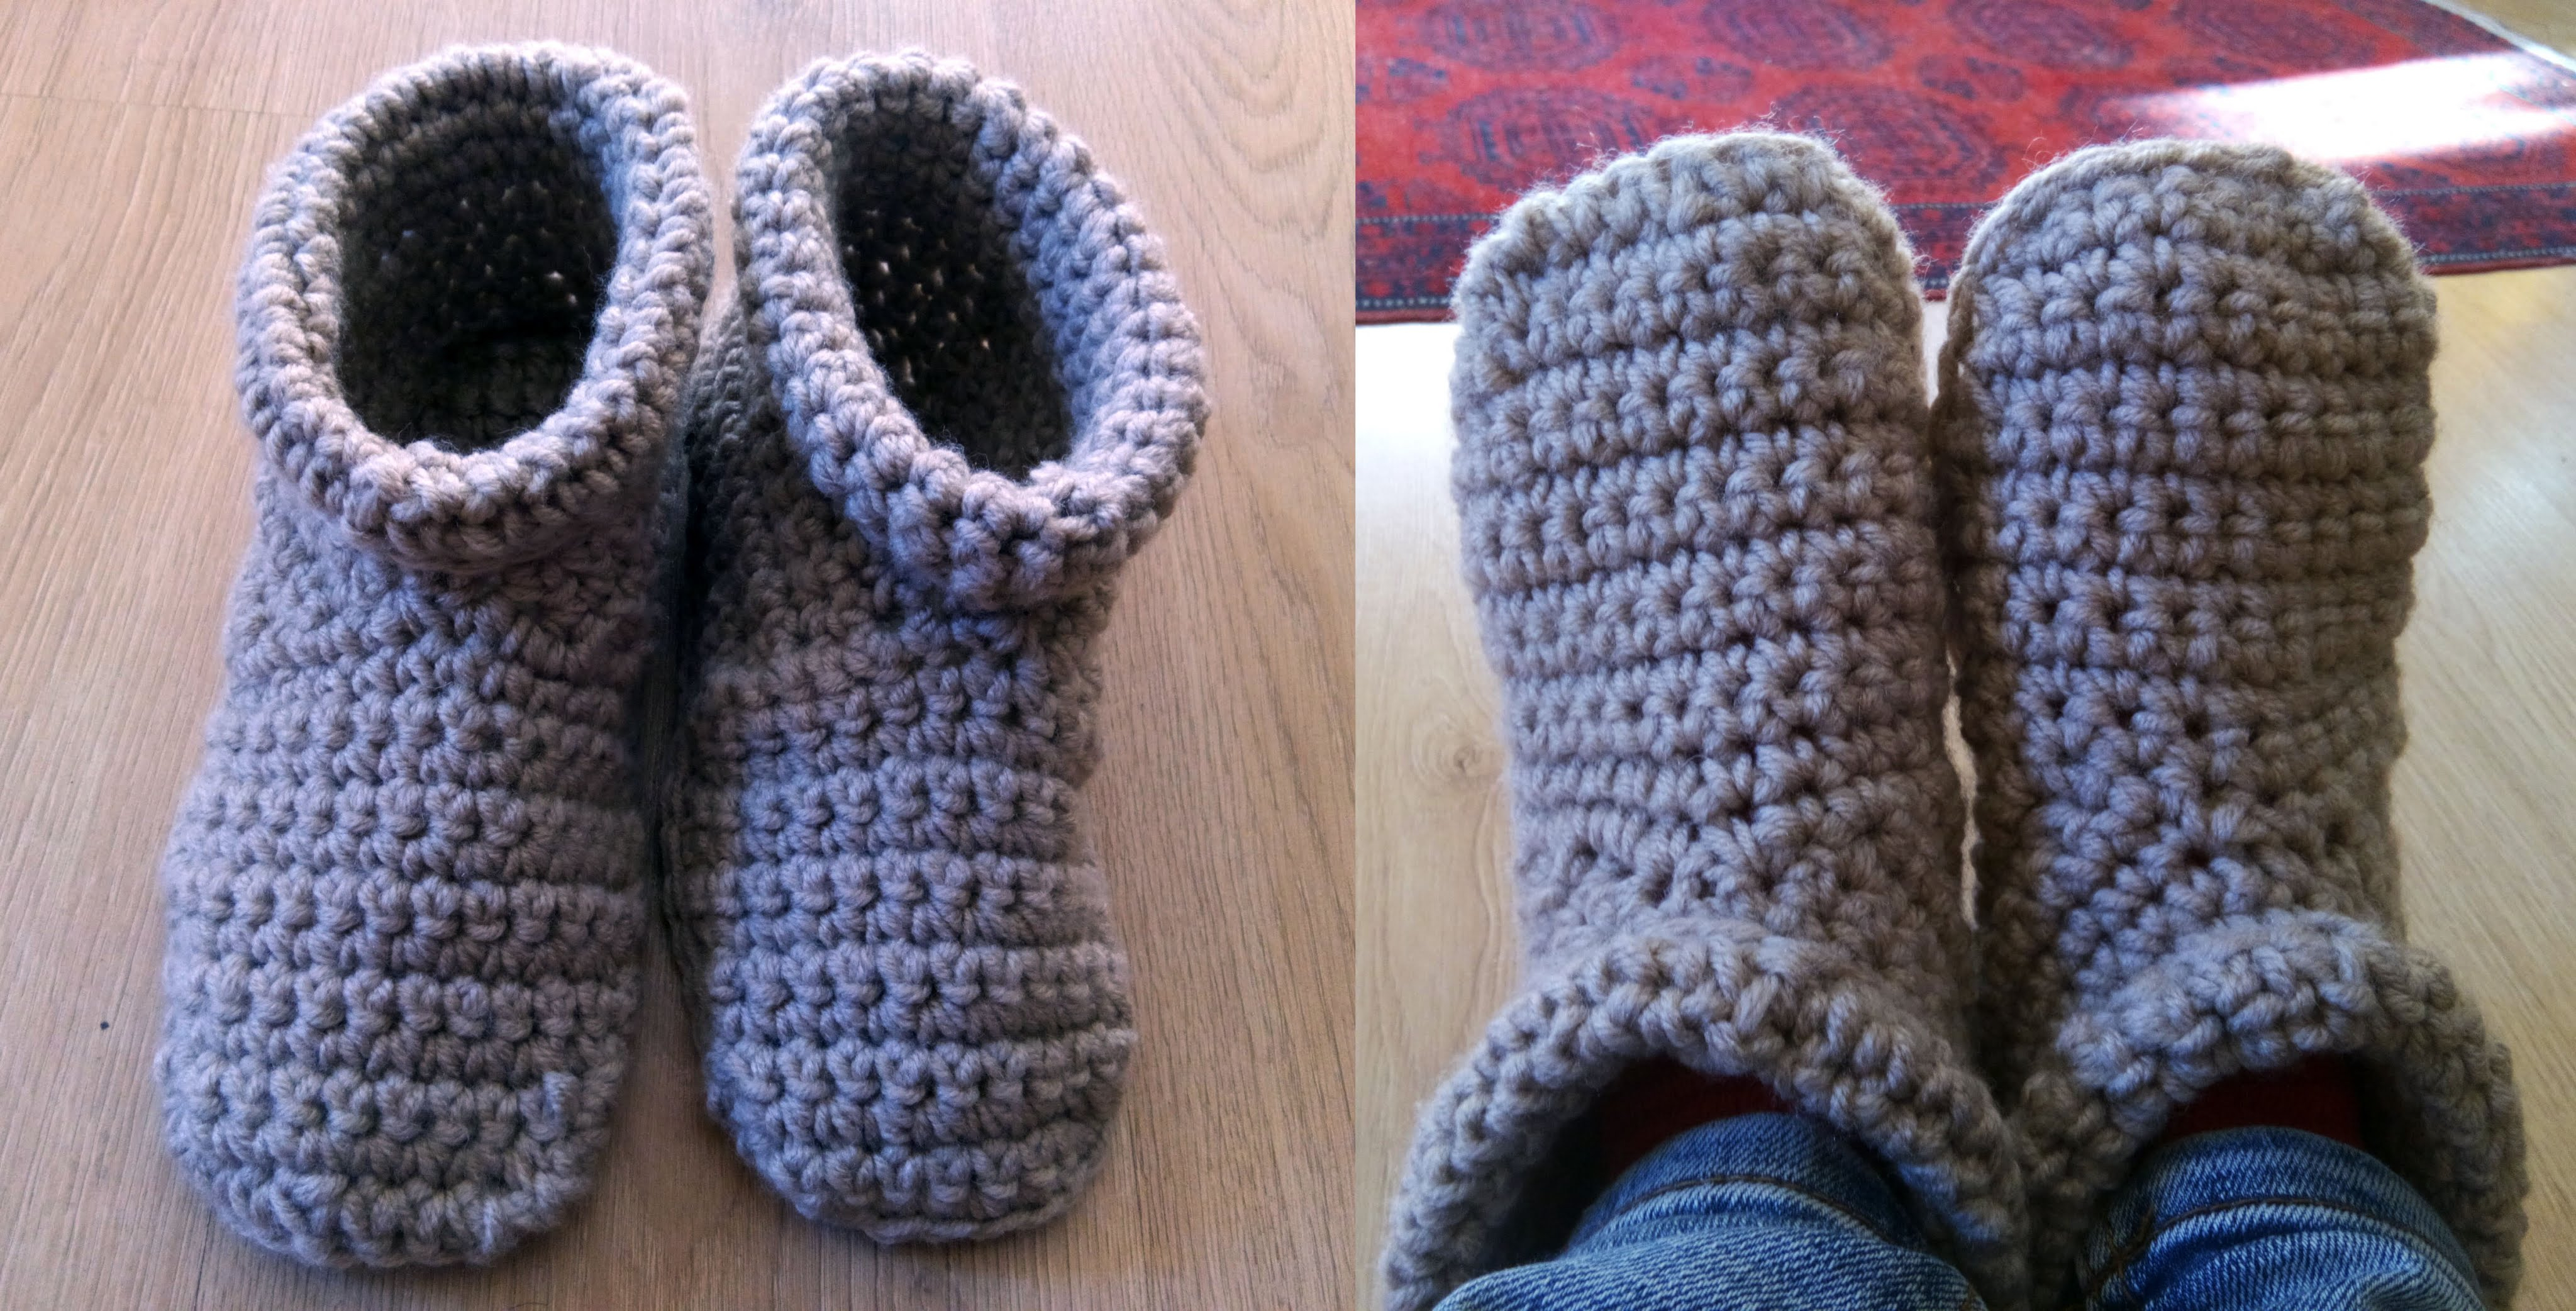 Converse Knitted Slippers Pattern Crochet Converse Slippers Pattern Free Comfy Crochet Slipper